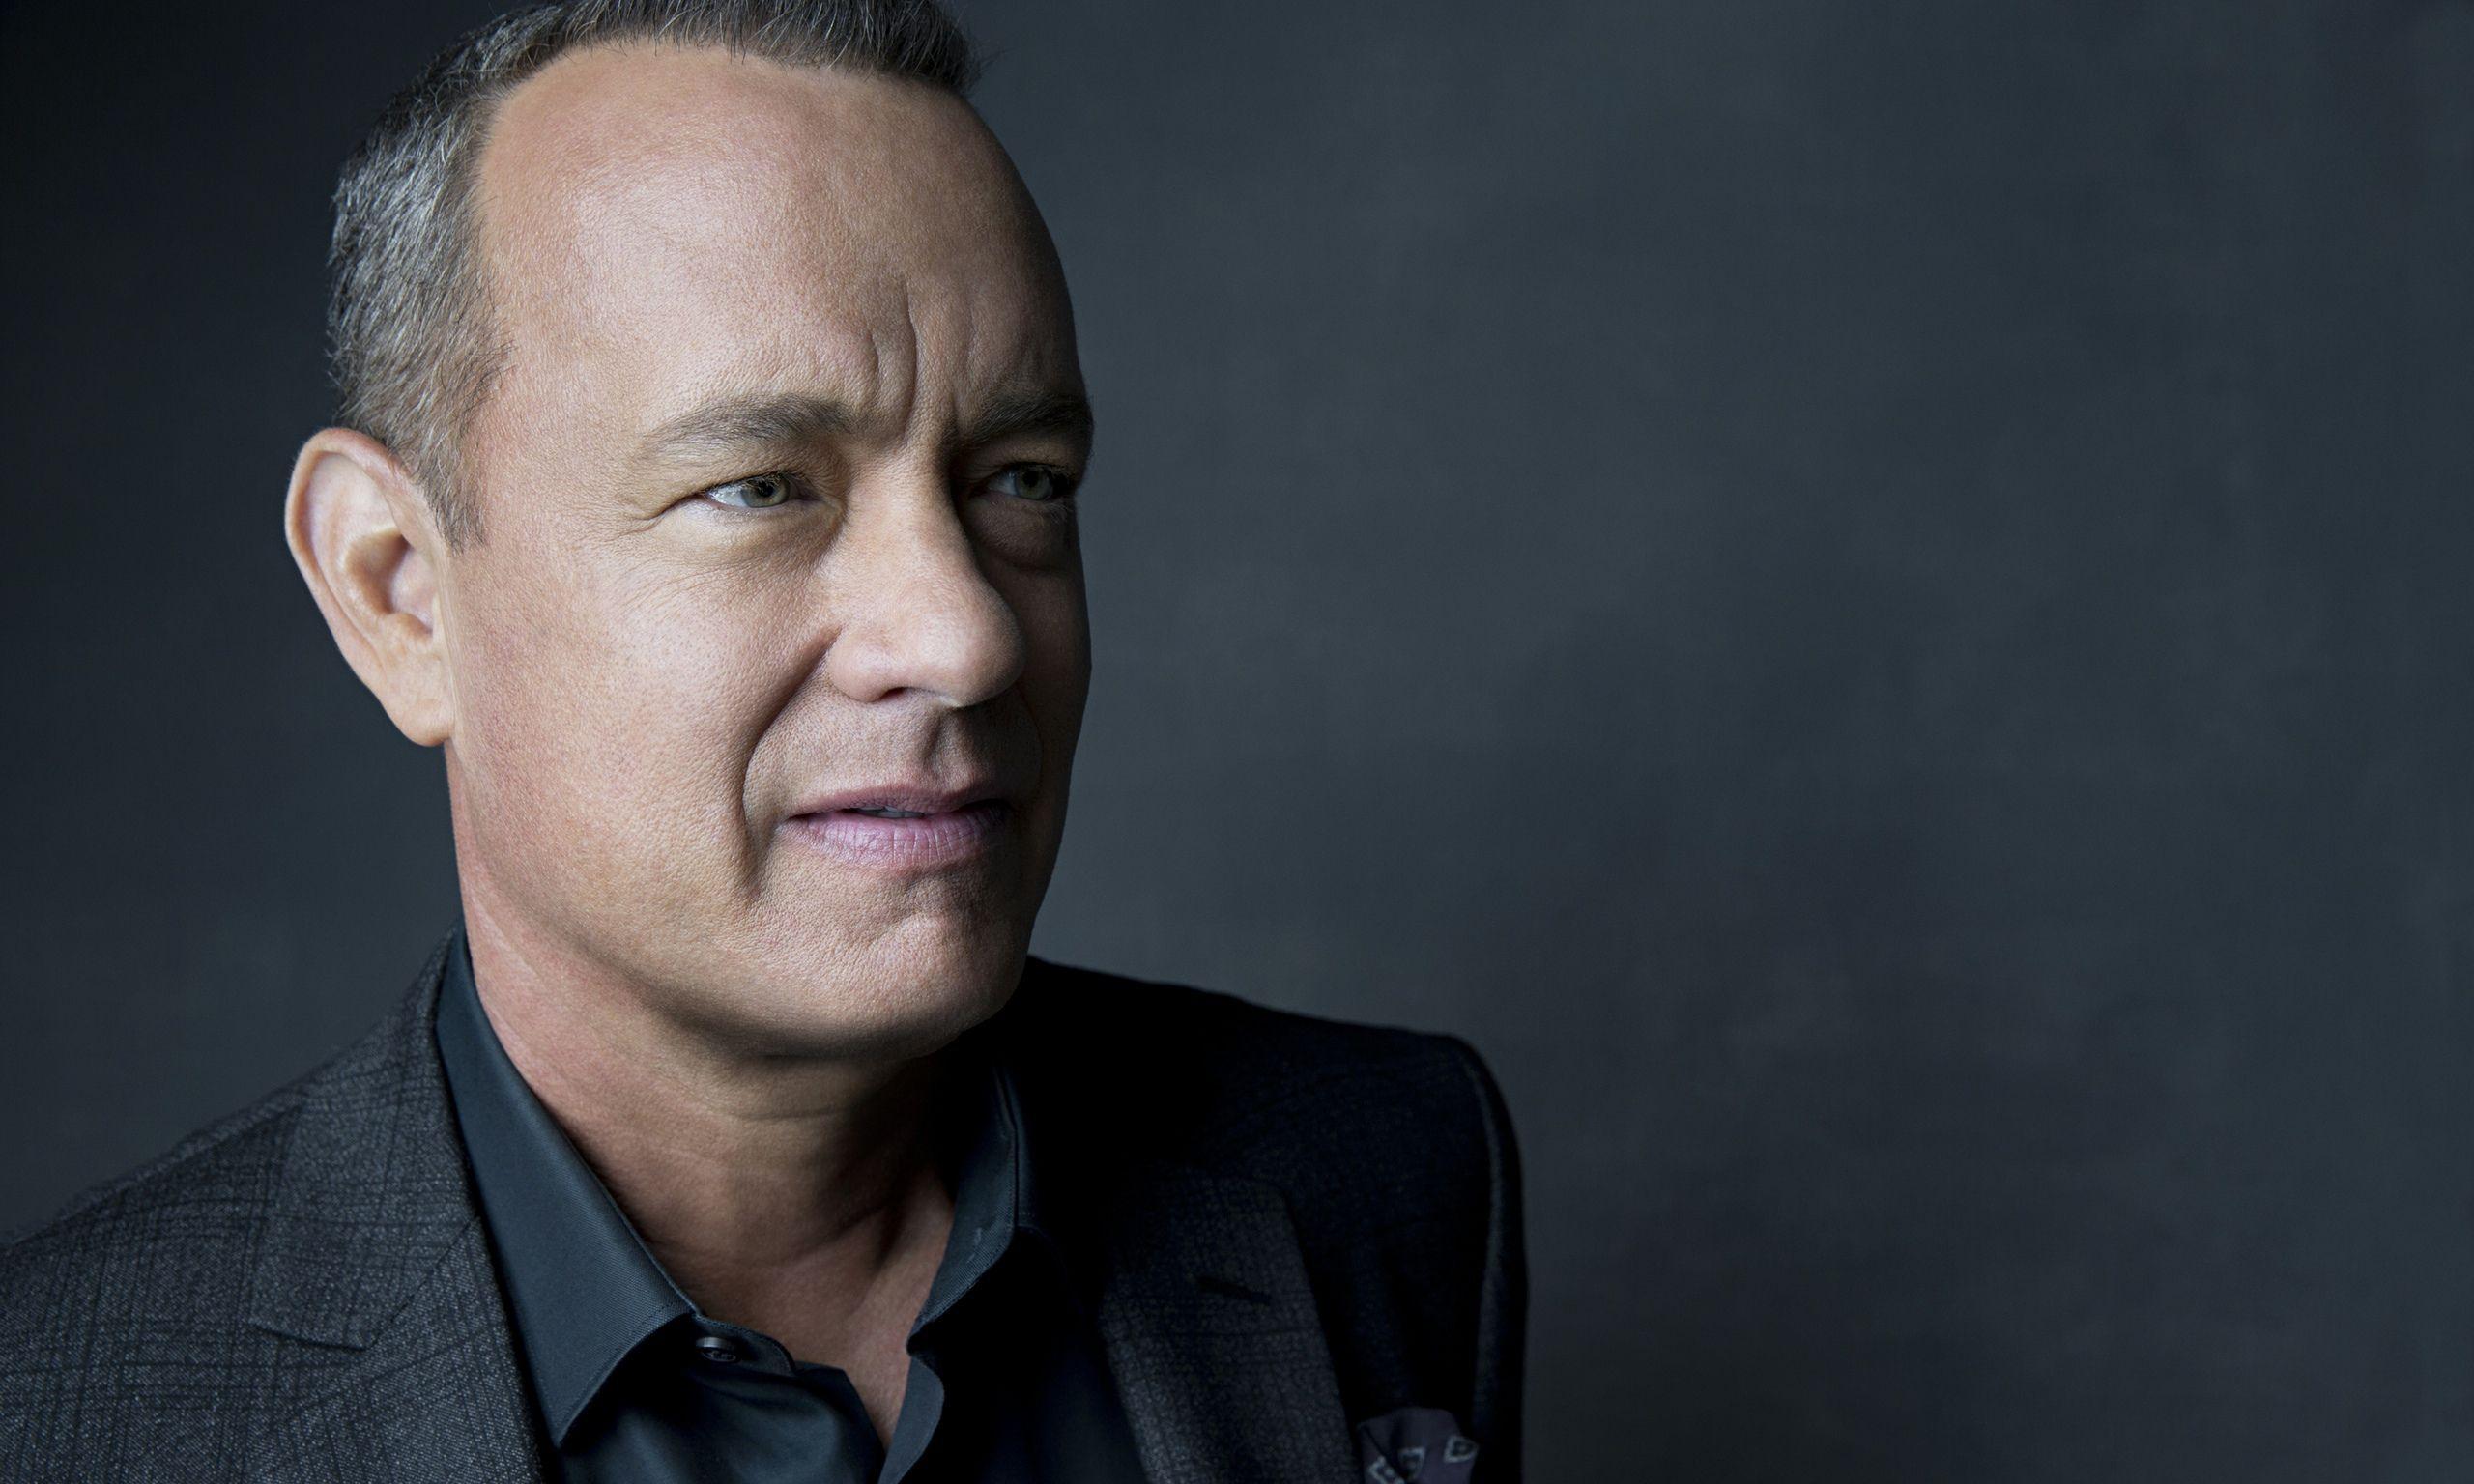 Tom Hanks Wallpaper High Resolution and Quality Download